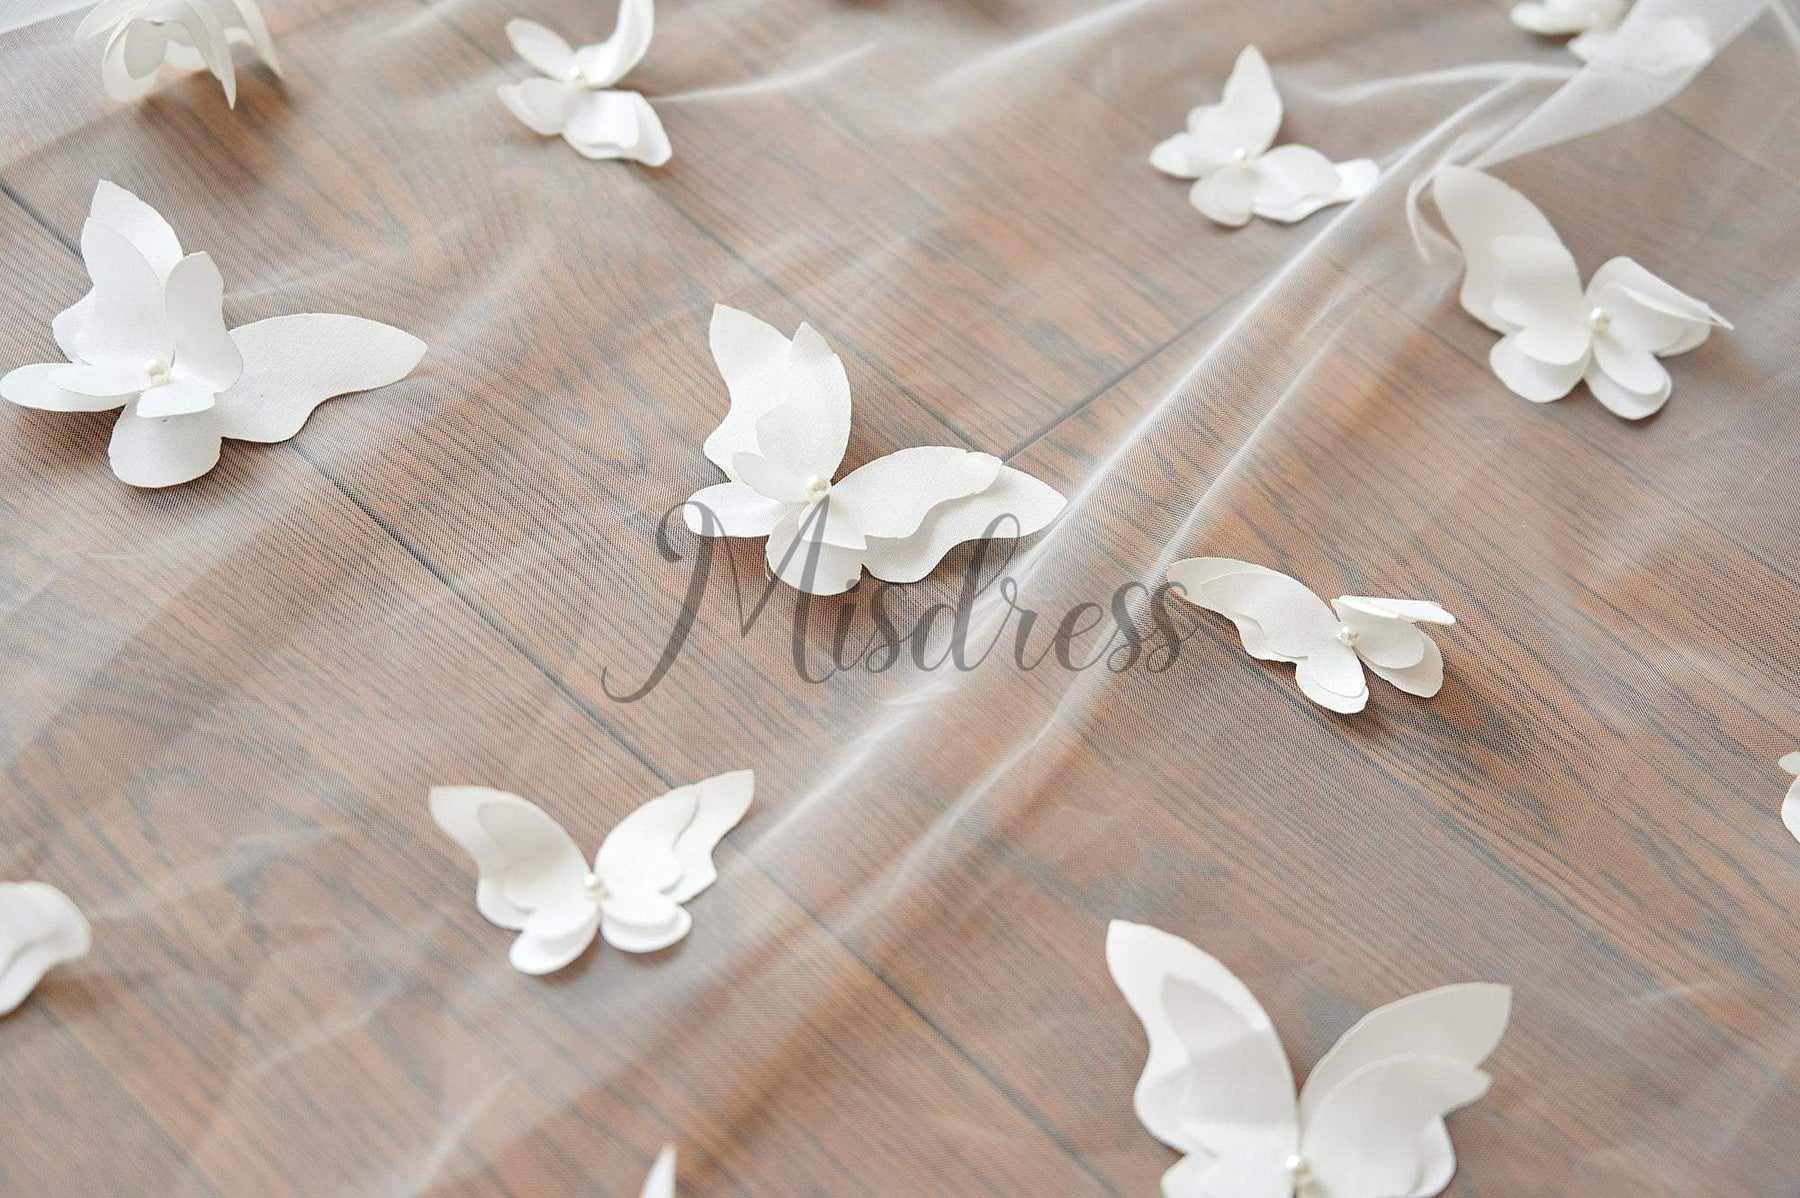 Butterfly Wedding Veil  Ivory Veil Cathedral Length